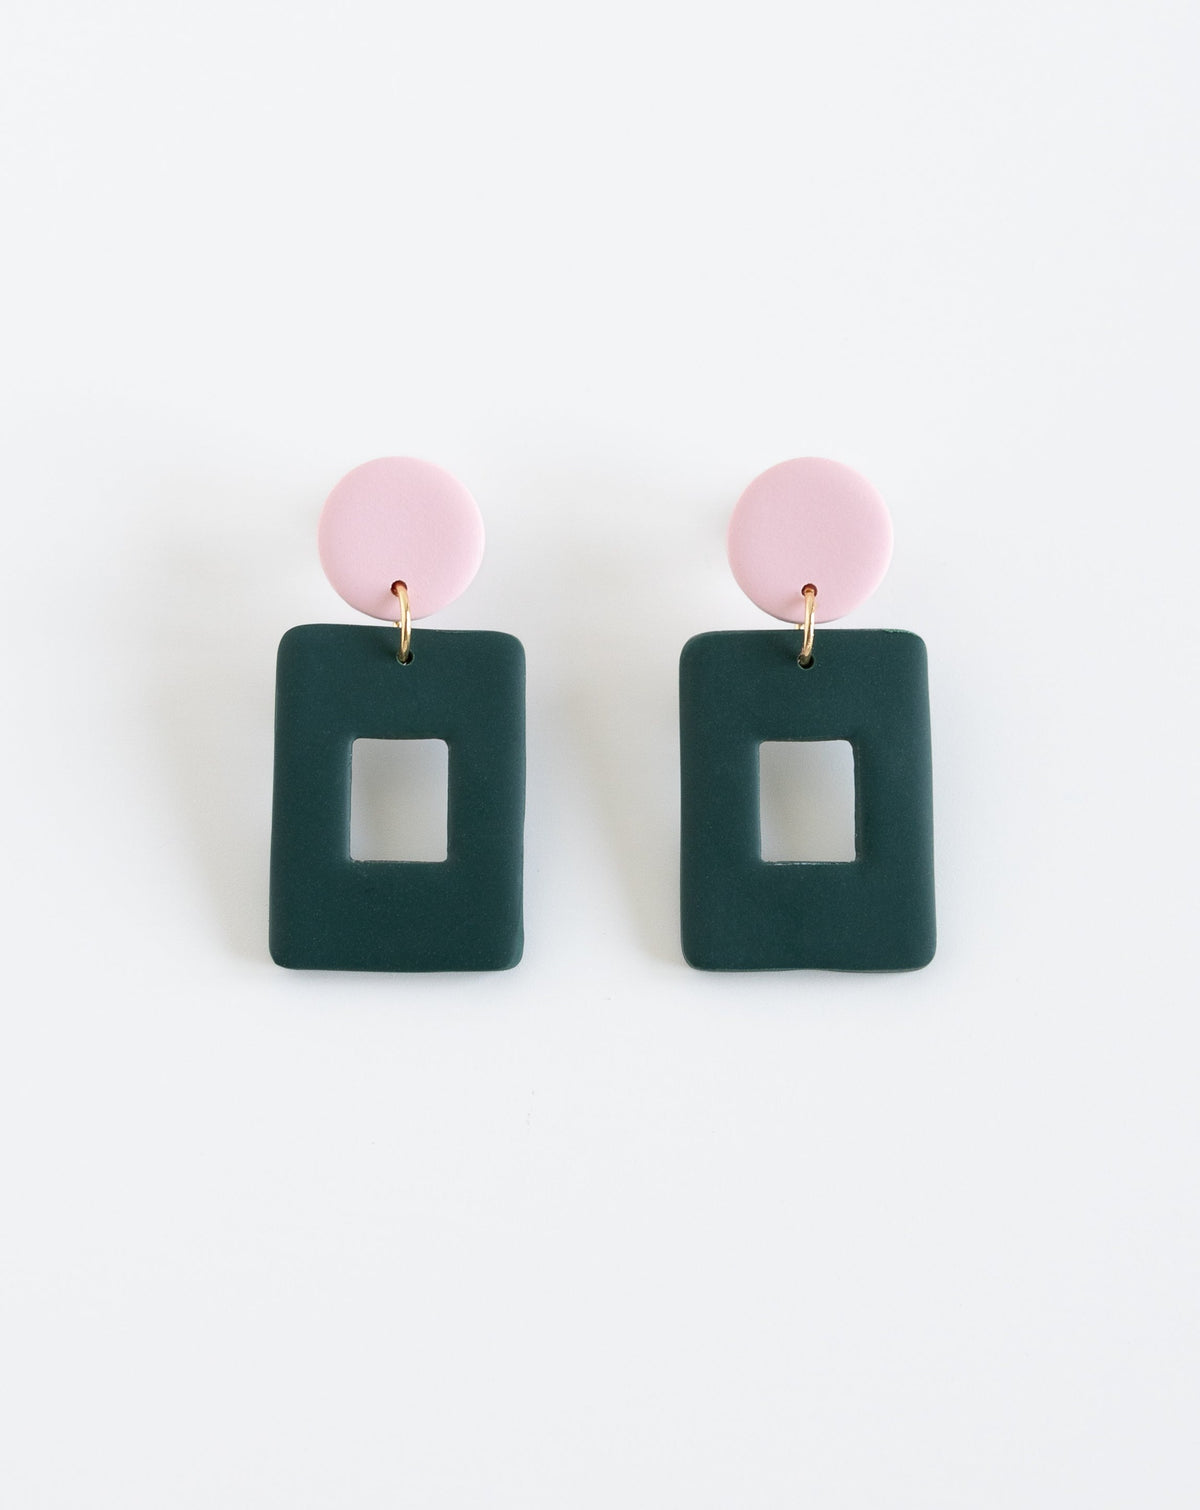 close-up of Muna earrings in Pine color.